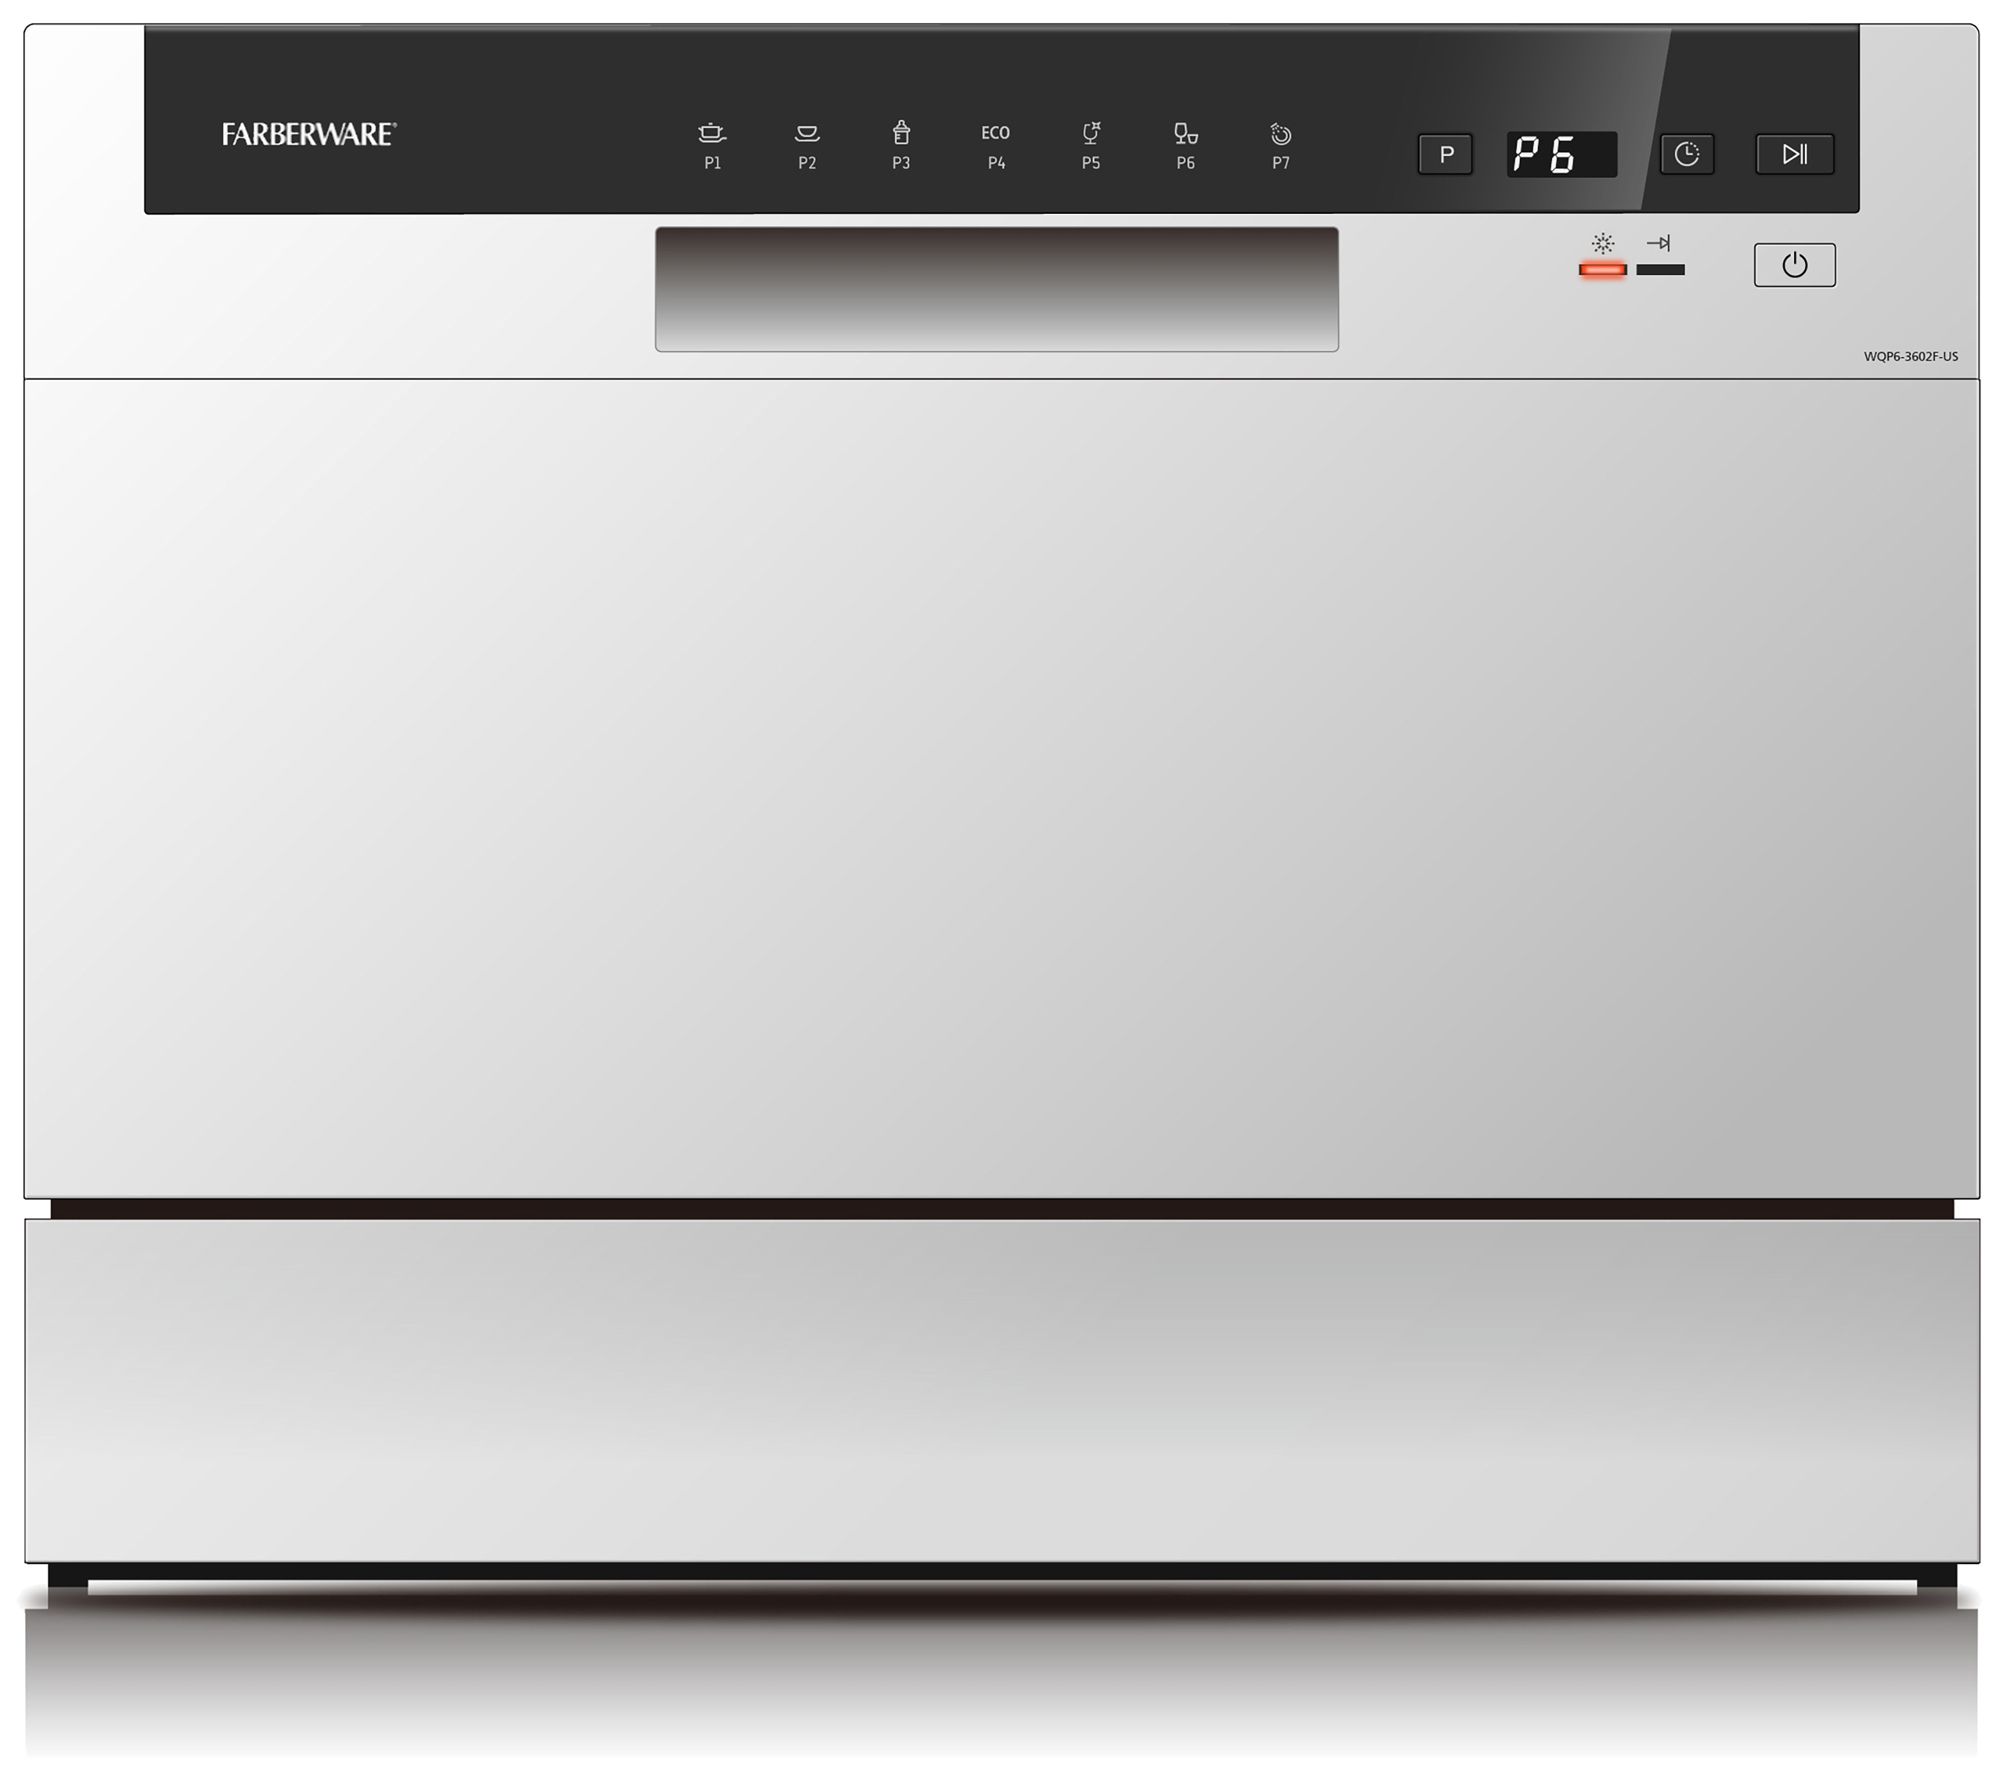 Farberware Countertop Dishwasher Review: Just How Useful Is It